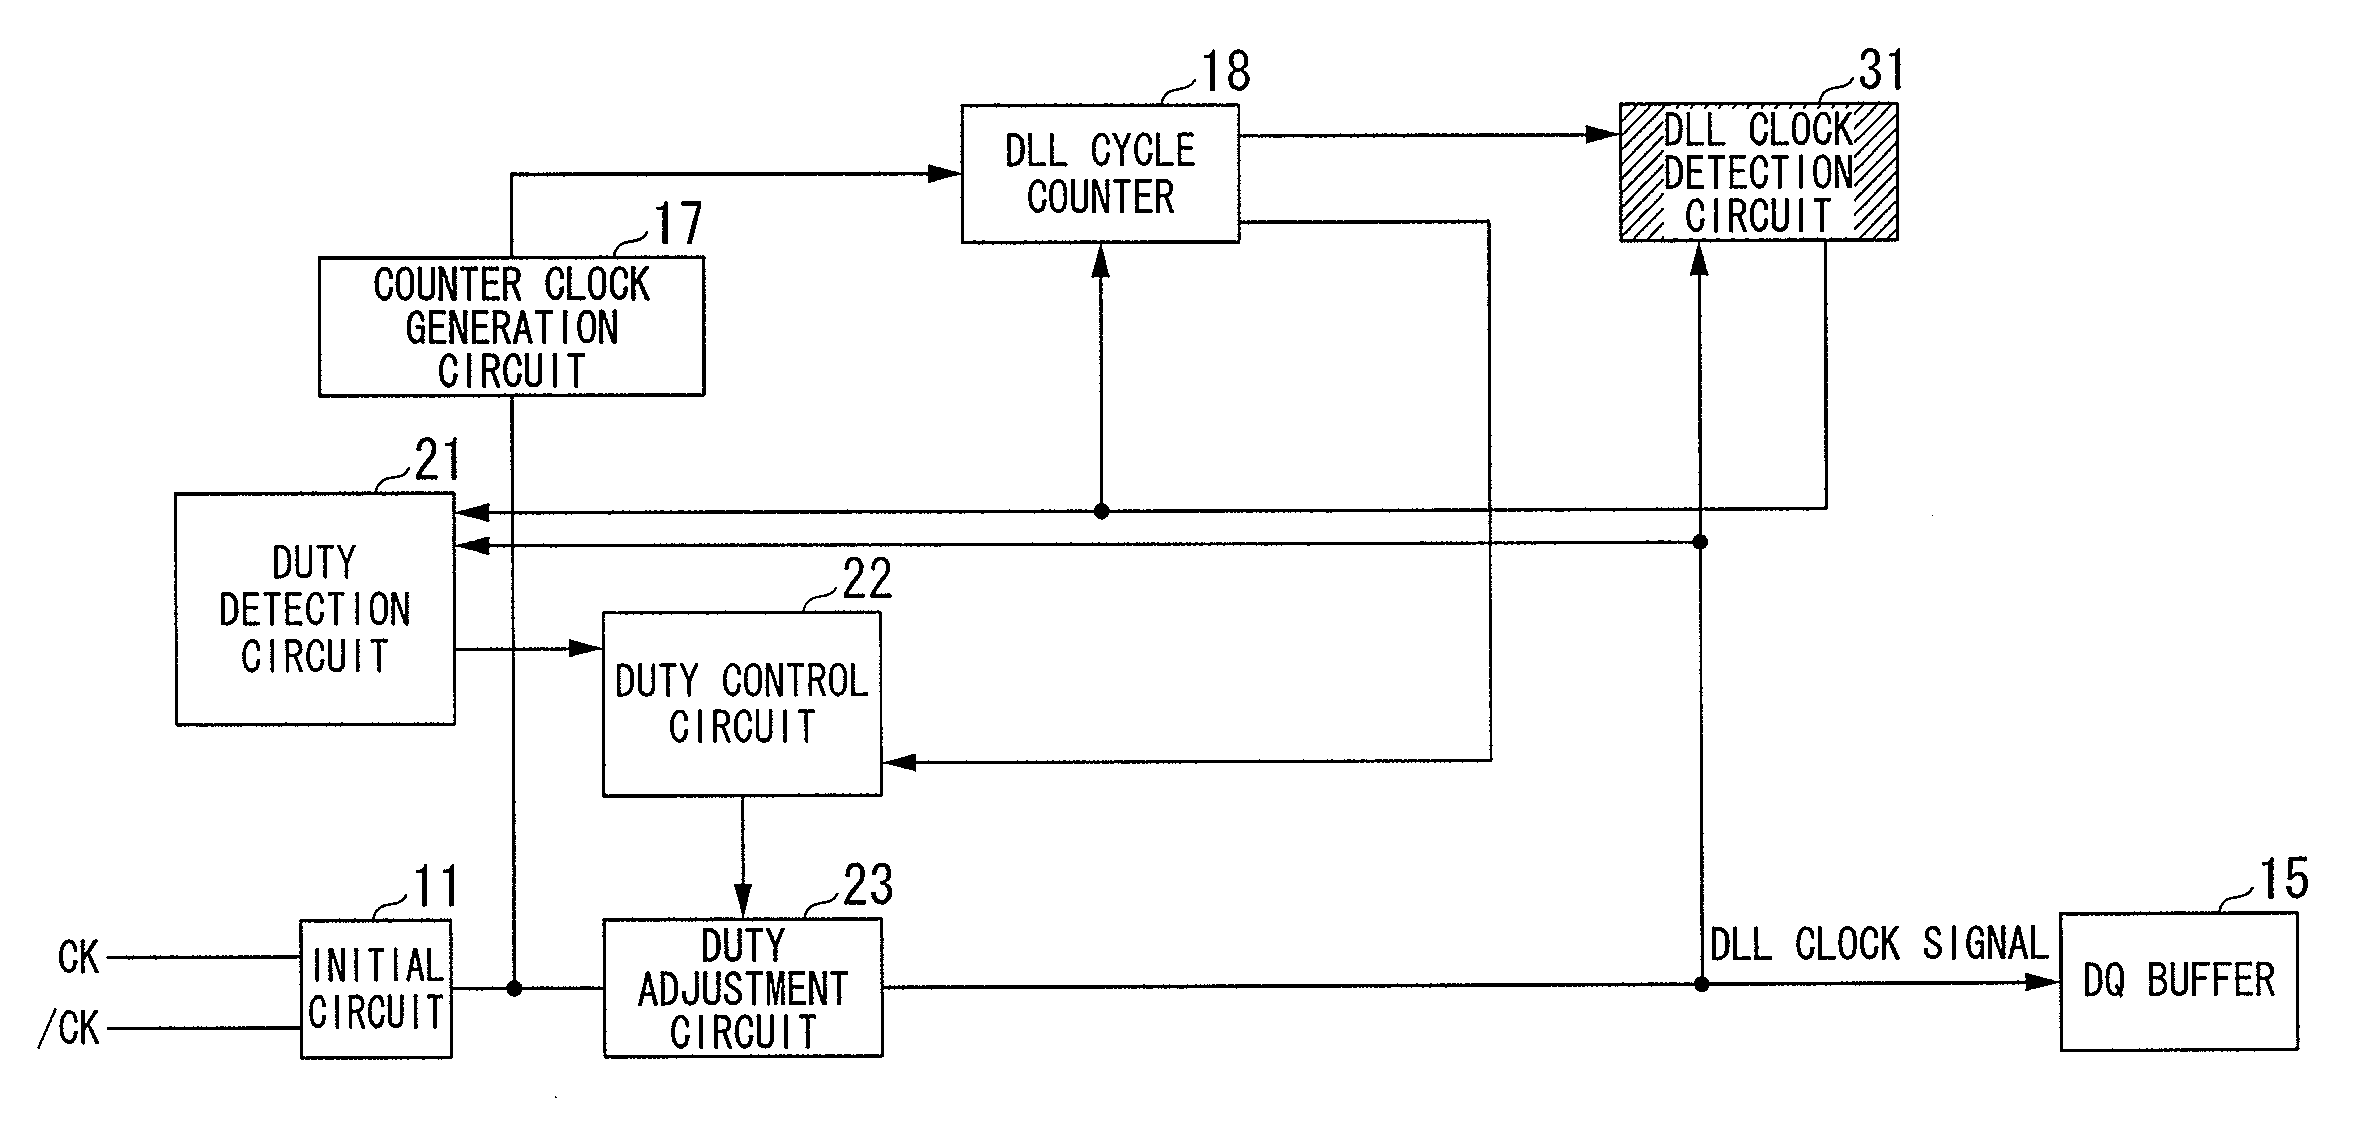 Dll circuit adapted to semiconductor device